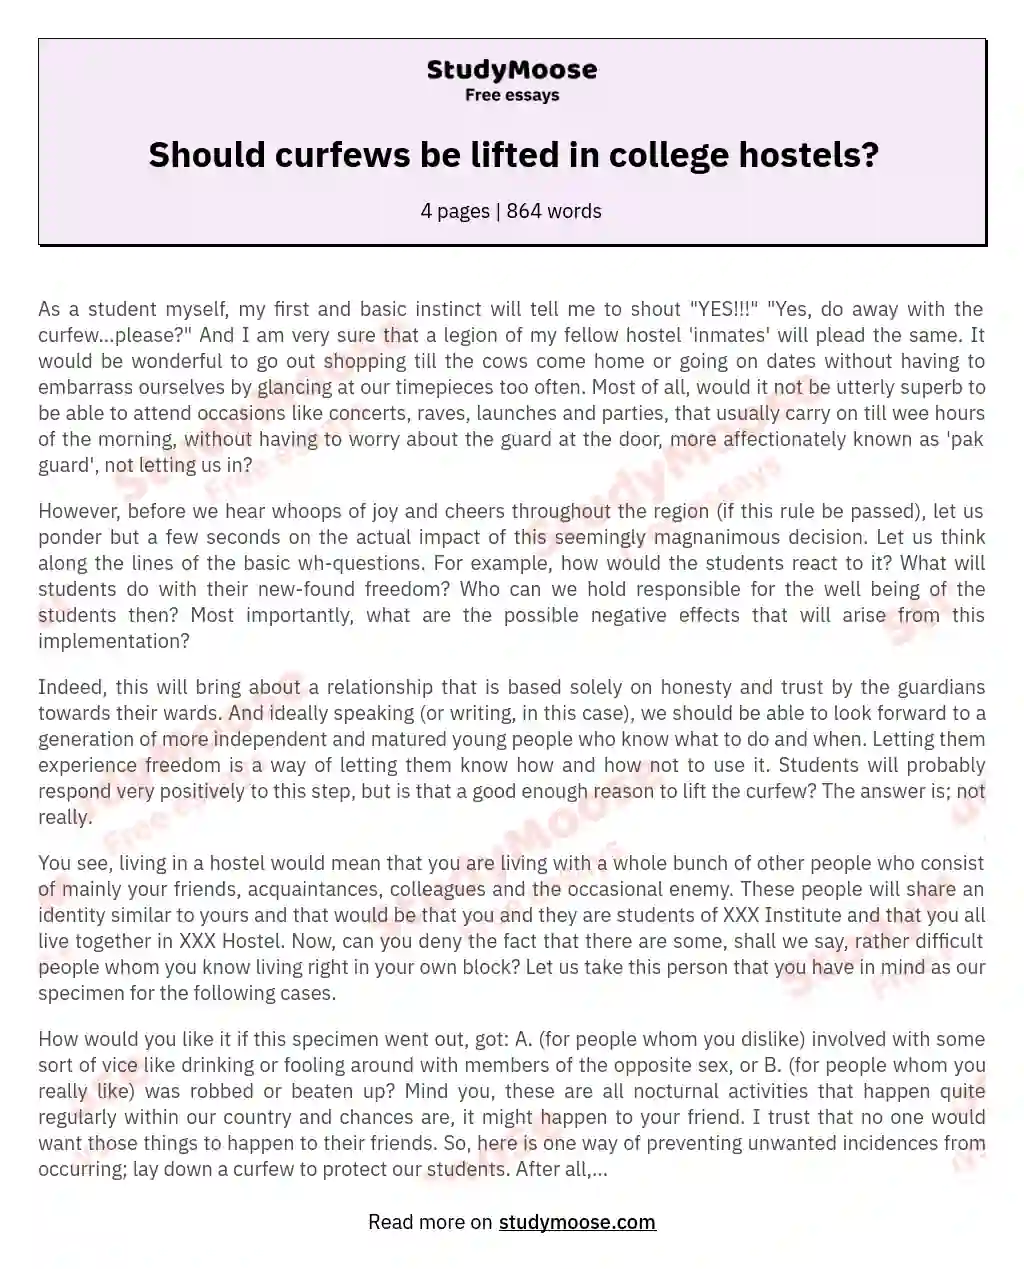 Should curfews be lifted in college hostels? essay